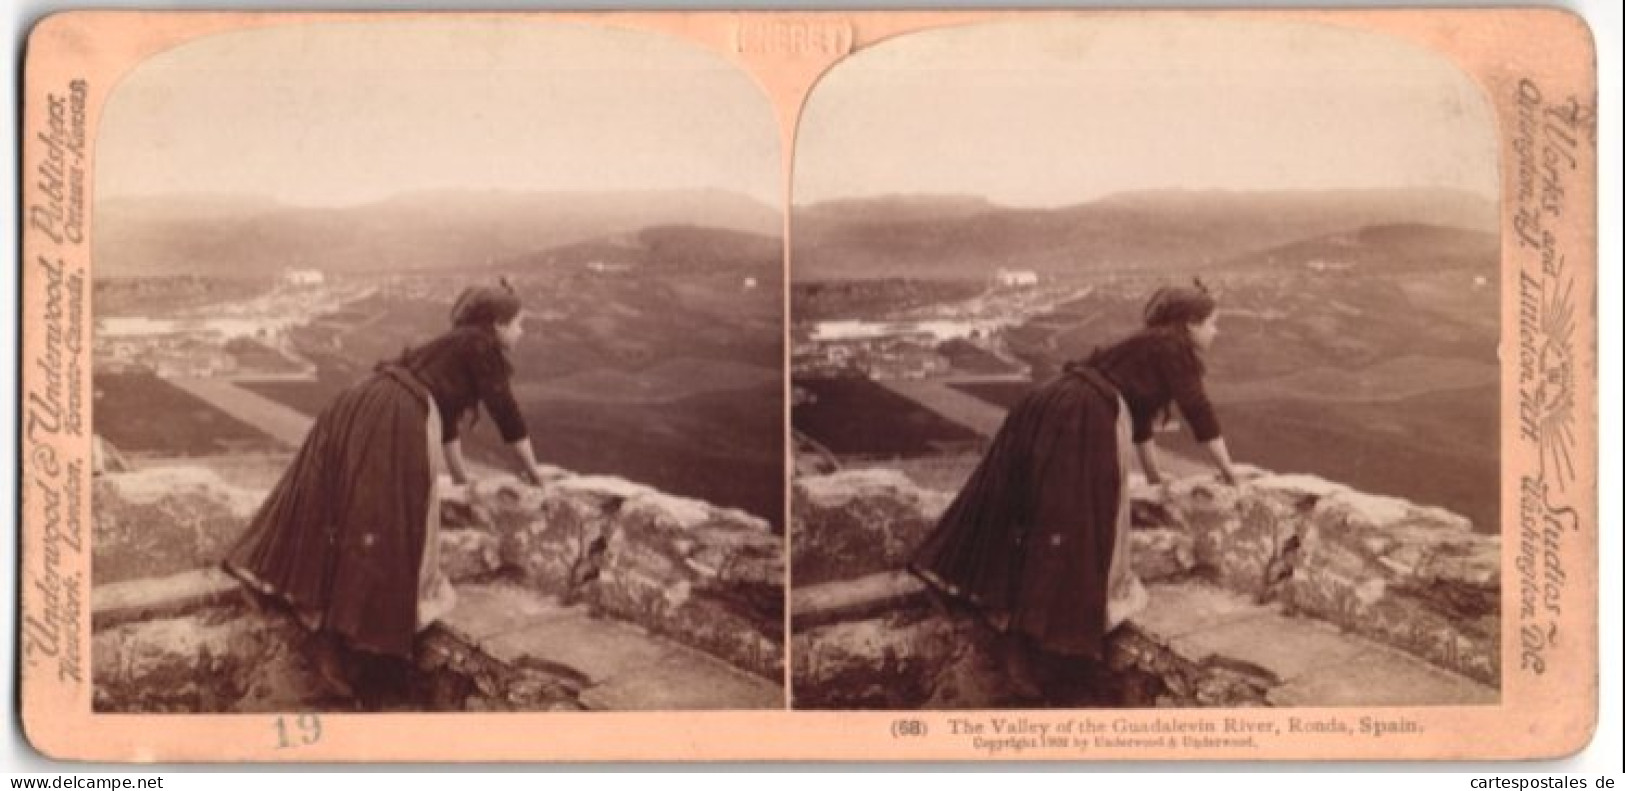 Stereo-Foto Underwood & Underwood, New York, Ansicht Ronda / Spanien, Panorama Tal Des Guadalevin  - Stereo-Photographie